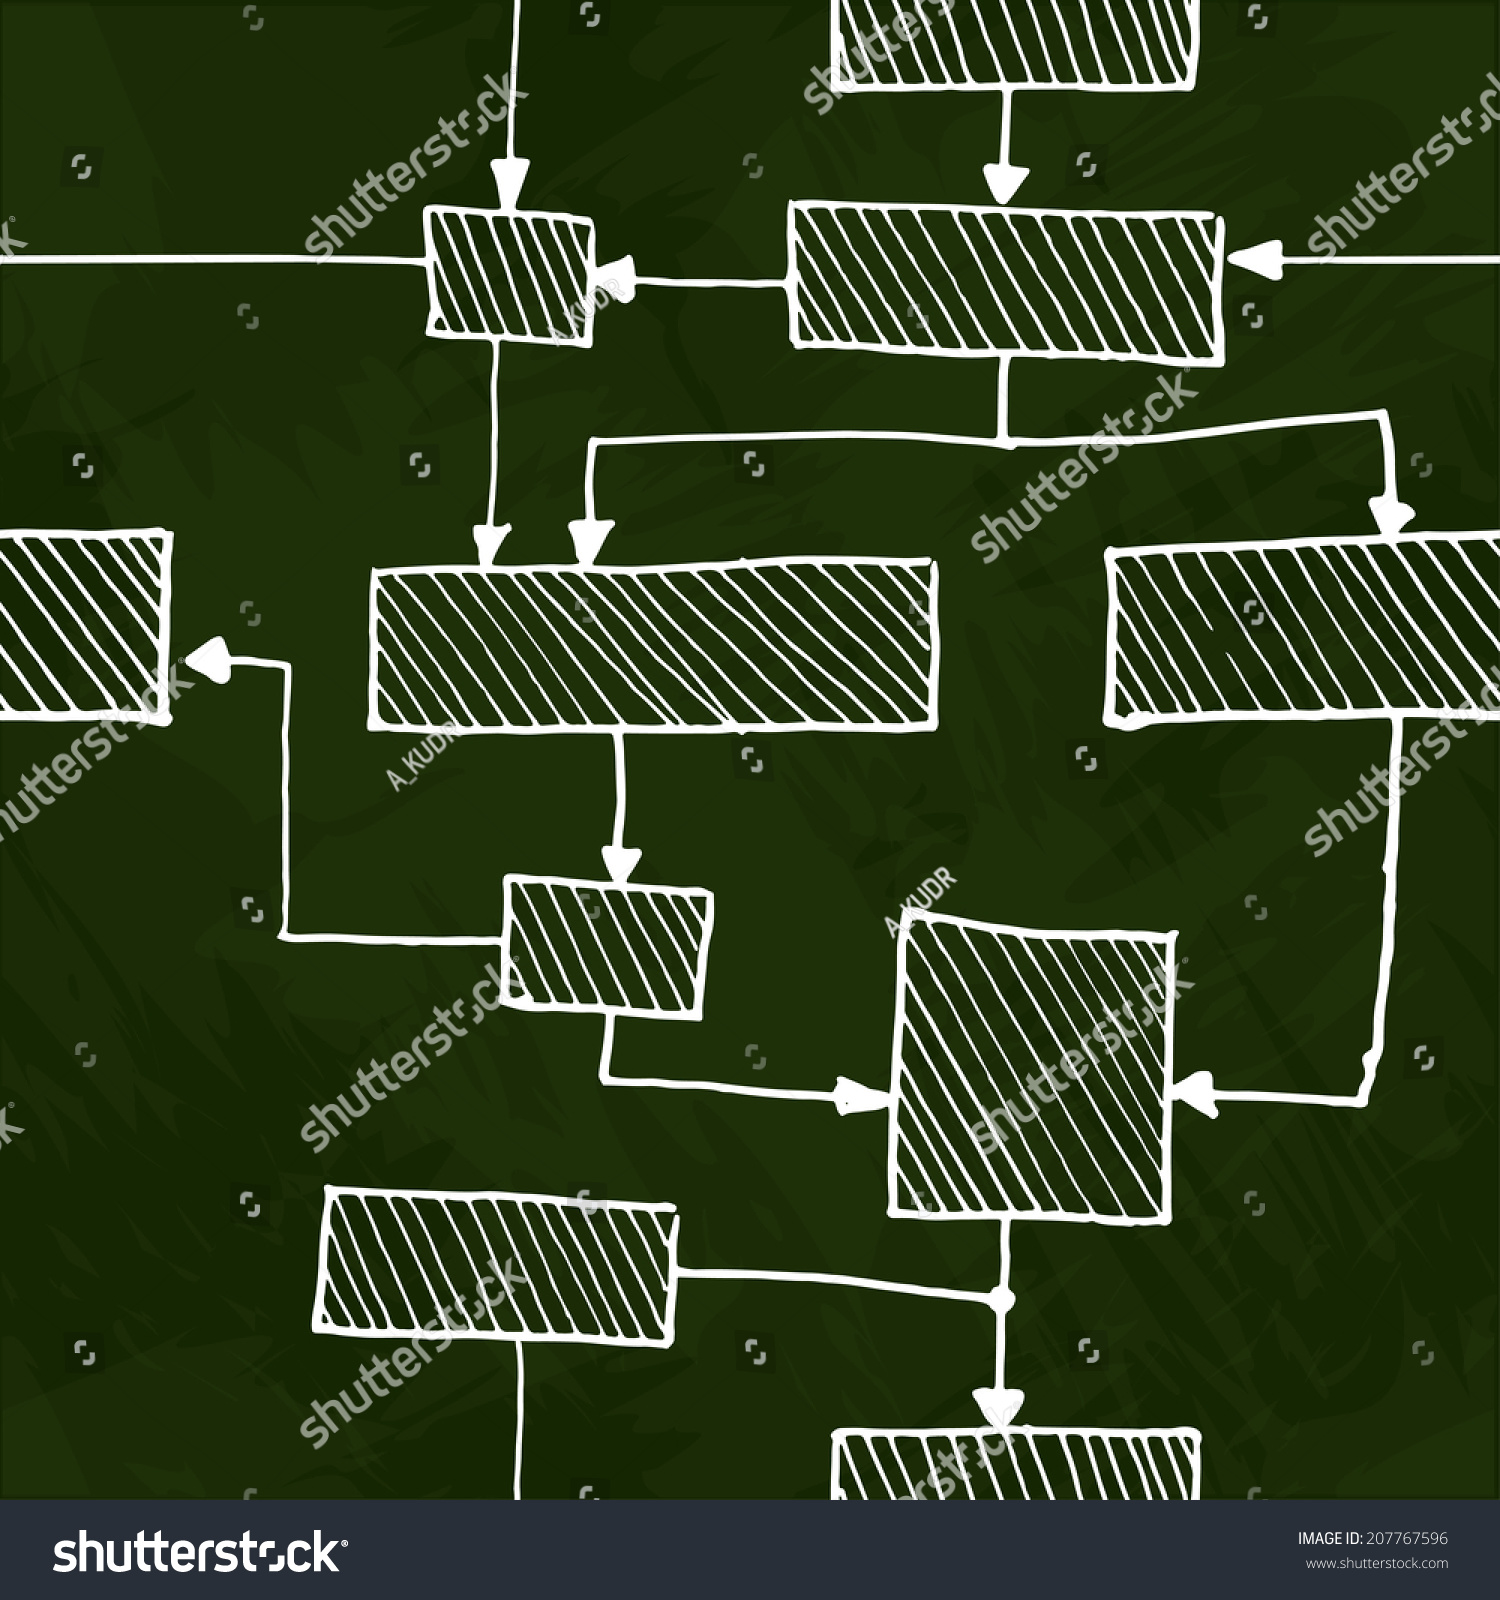 Vector Hand Draw Flowchart Seamless Background Stock Vector Royalty Free 207767596 Shutterstock 6973